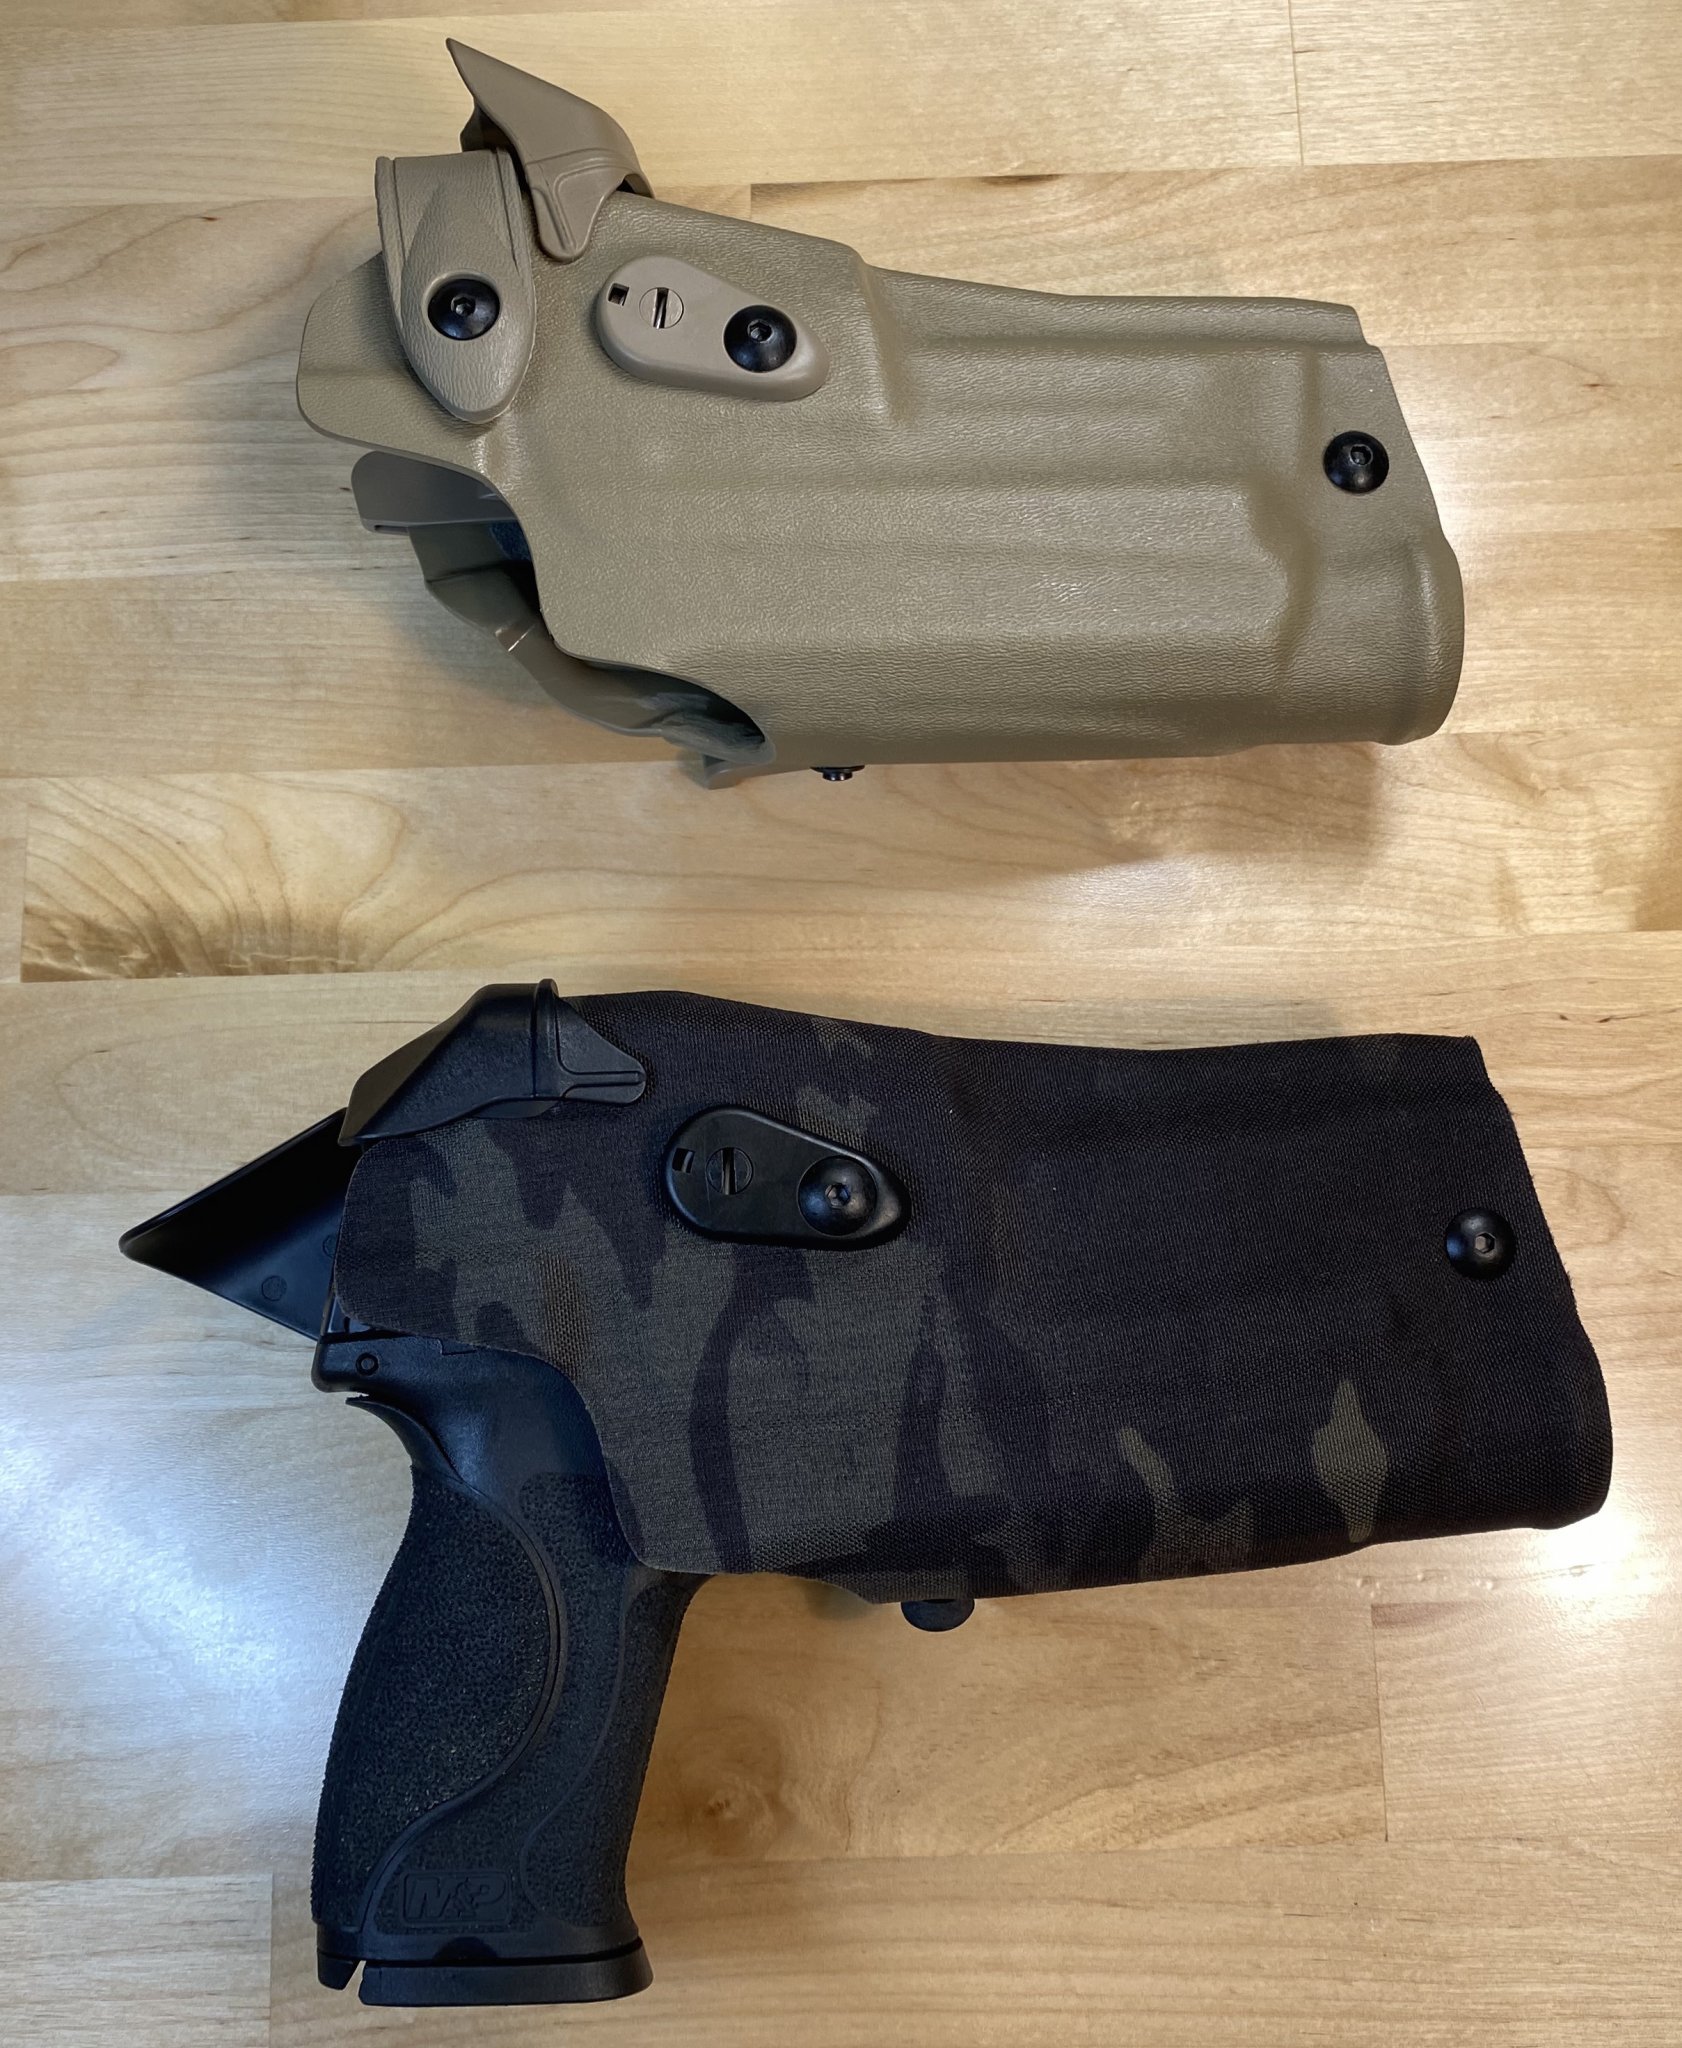 IMG_0148Smith & Wesson M&P 2.0 PC Safariland RDS Black Cammo Holster 07.30.21 copy.jpg